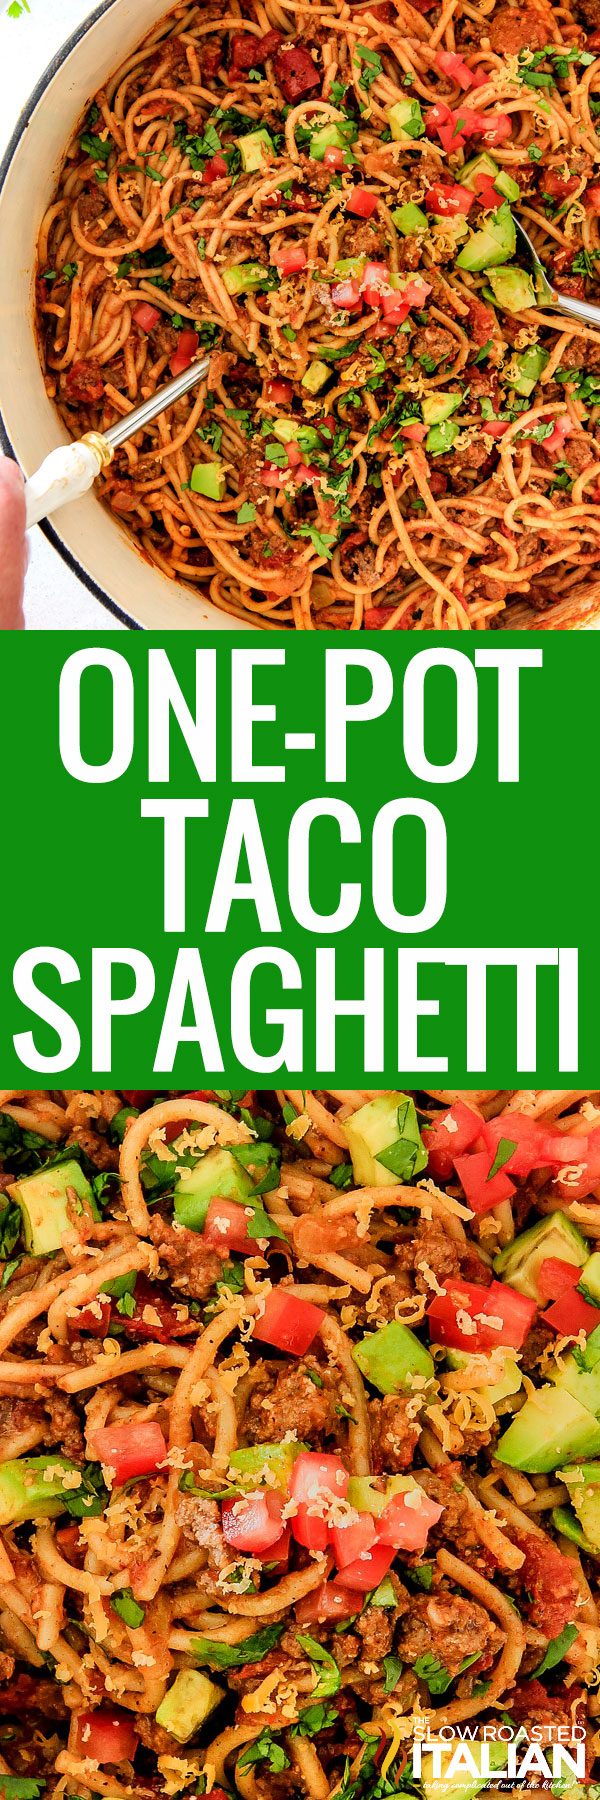 titled image (and shown): one pot taco spaghetti 